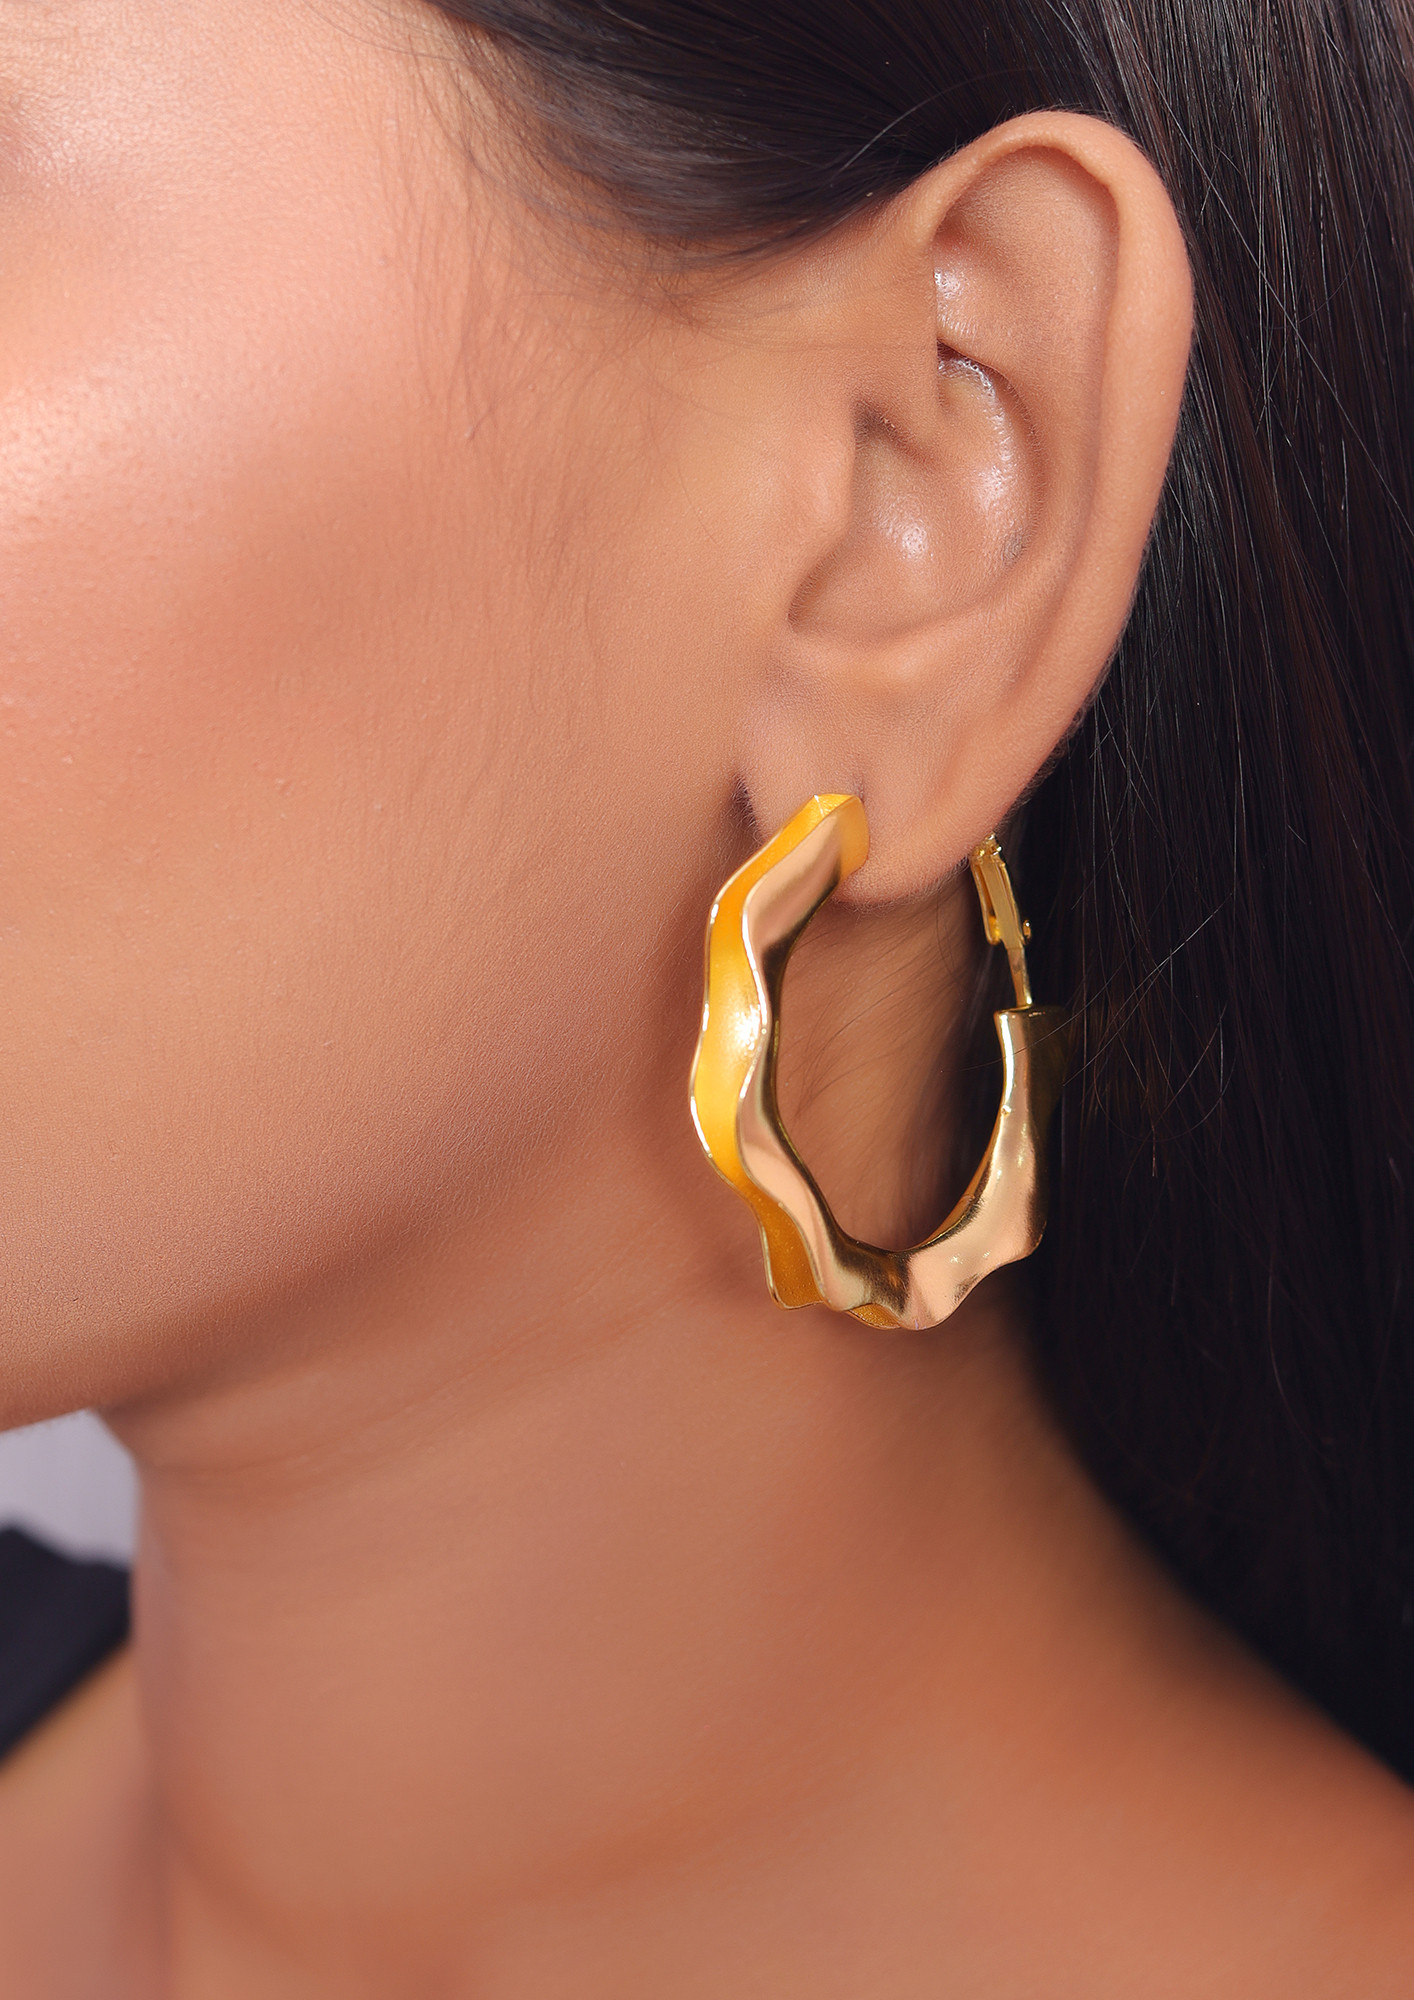 Aggregate more than 180 thick hoop earrings india latest